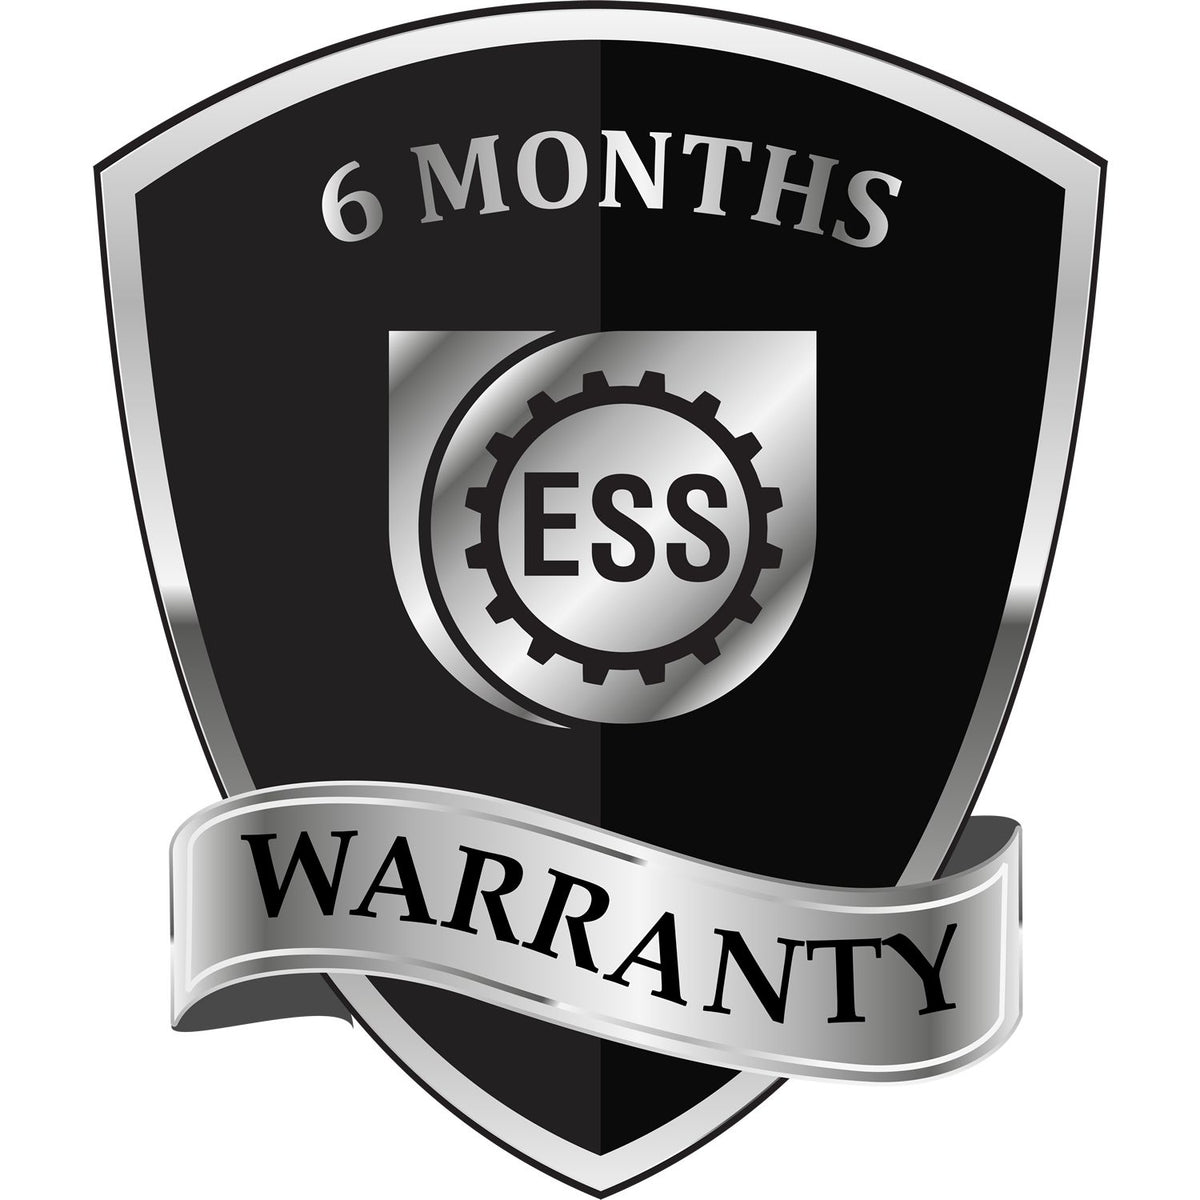 A black and silver badge or emblem showing warranty information for the Wisconsin Professional Geologist Seal Stamp